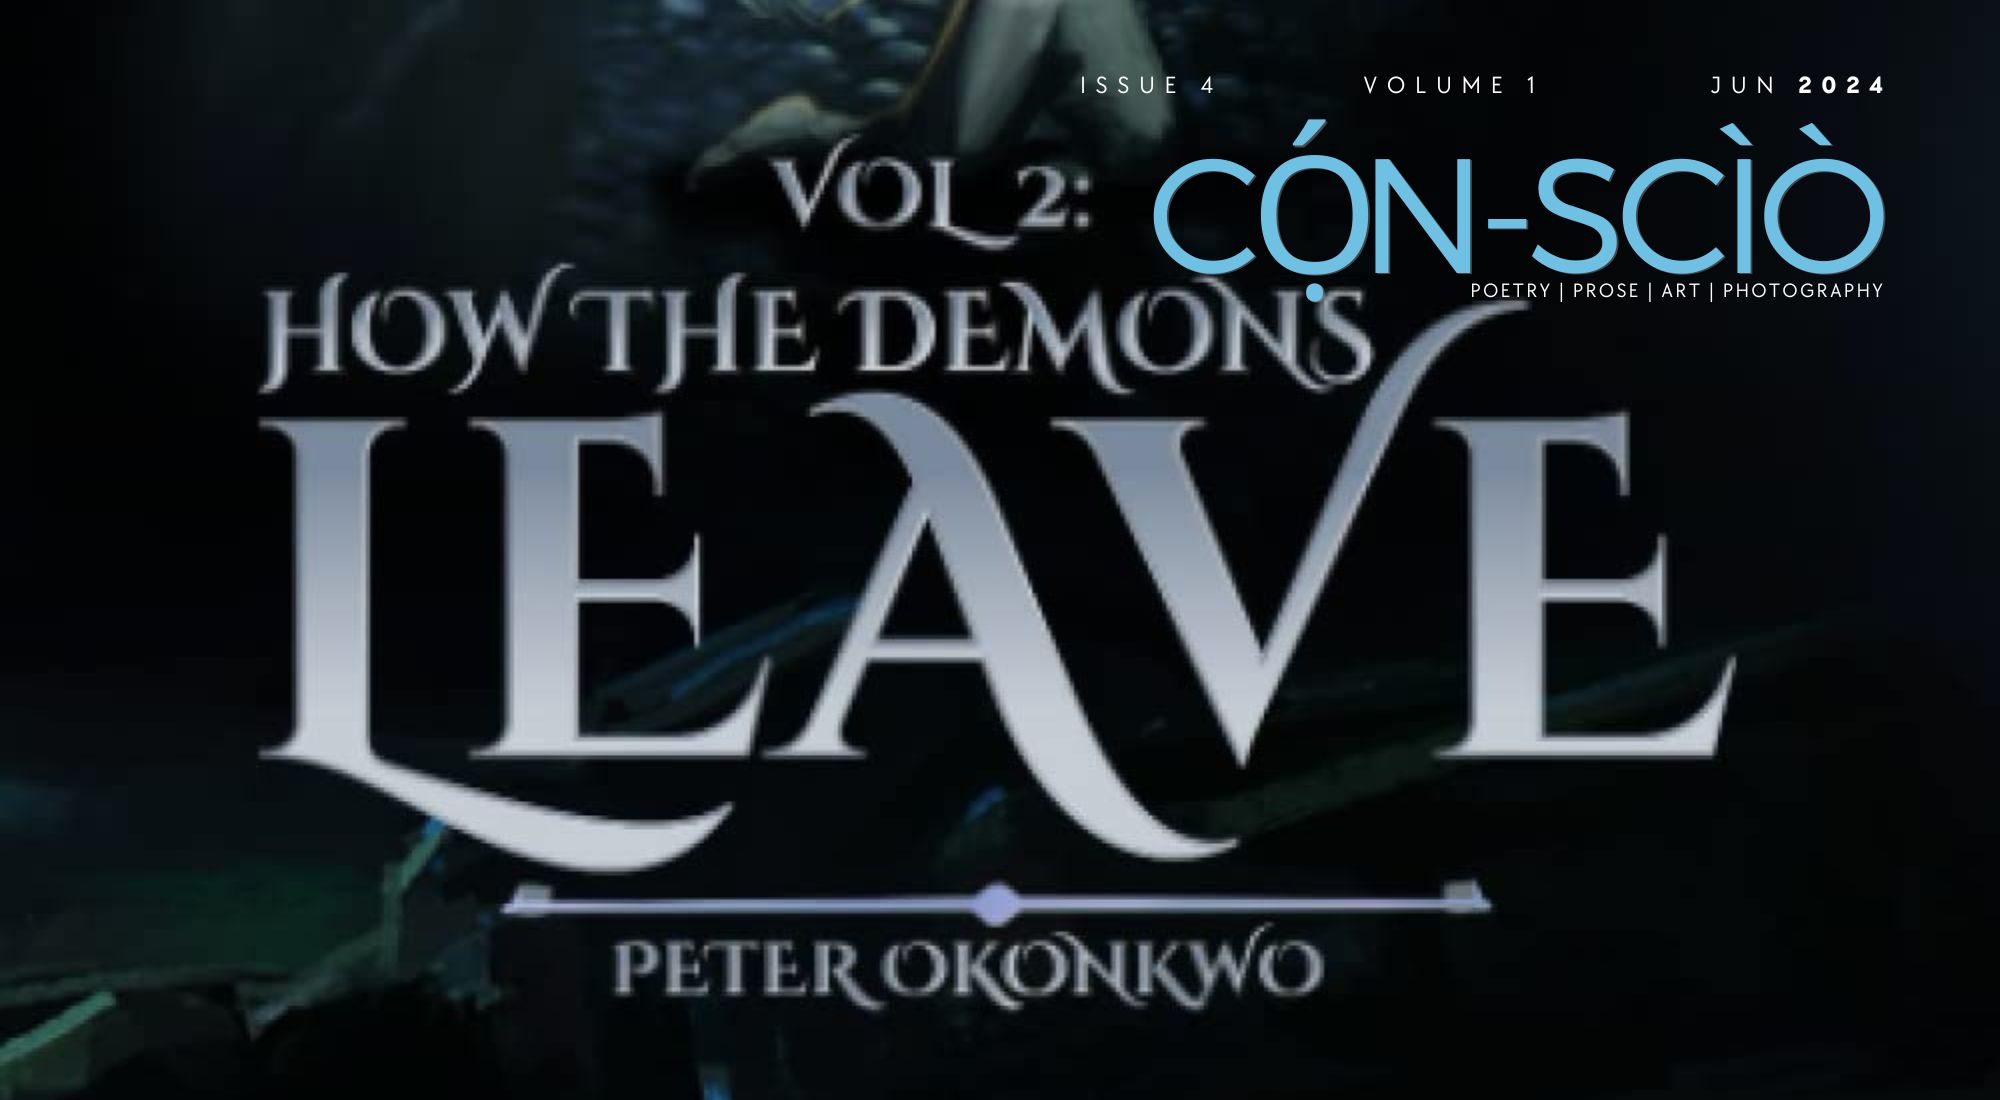 WARFARE ON PAPER | a CỌ́N-SCÌÒ review of Peter Okonkwo’s ‘How the Demons Leave’ by Jide Badmus